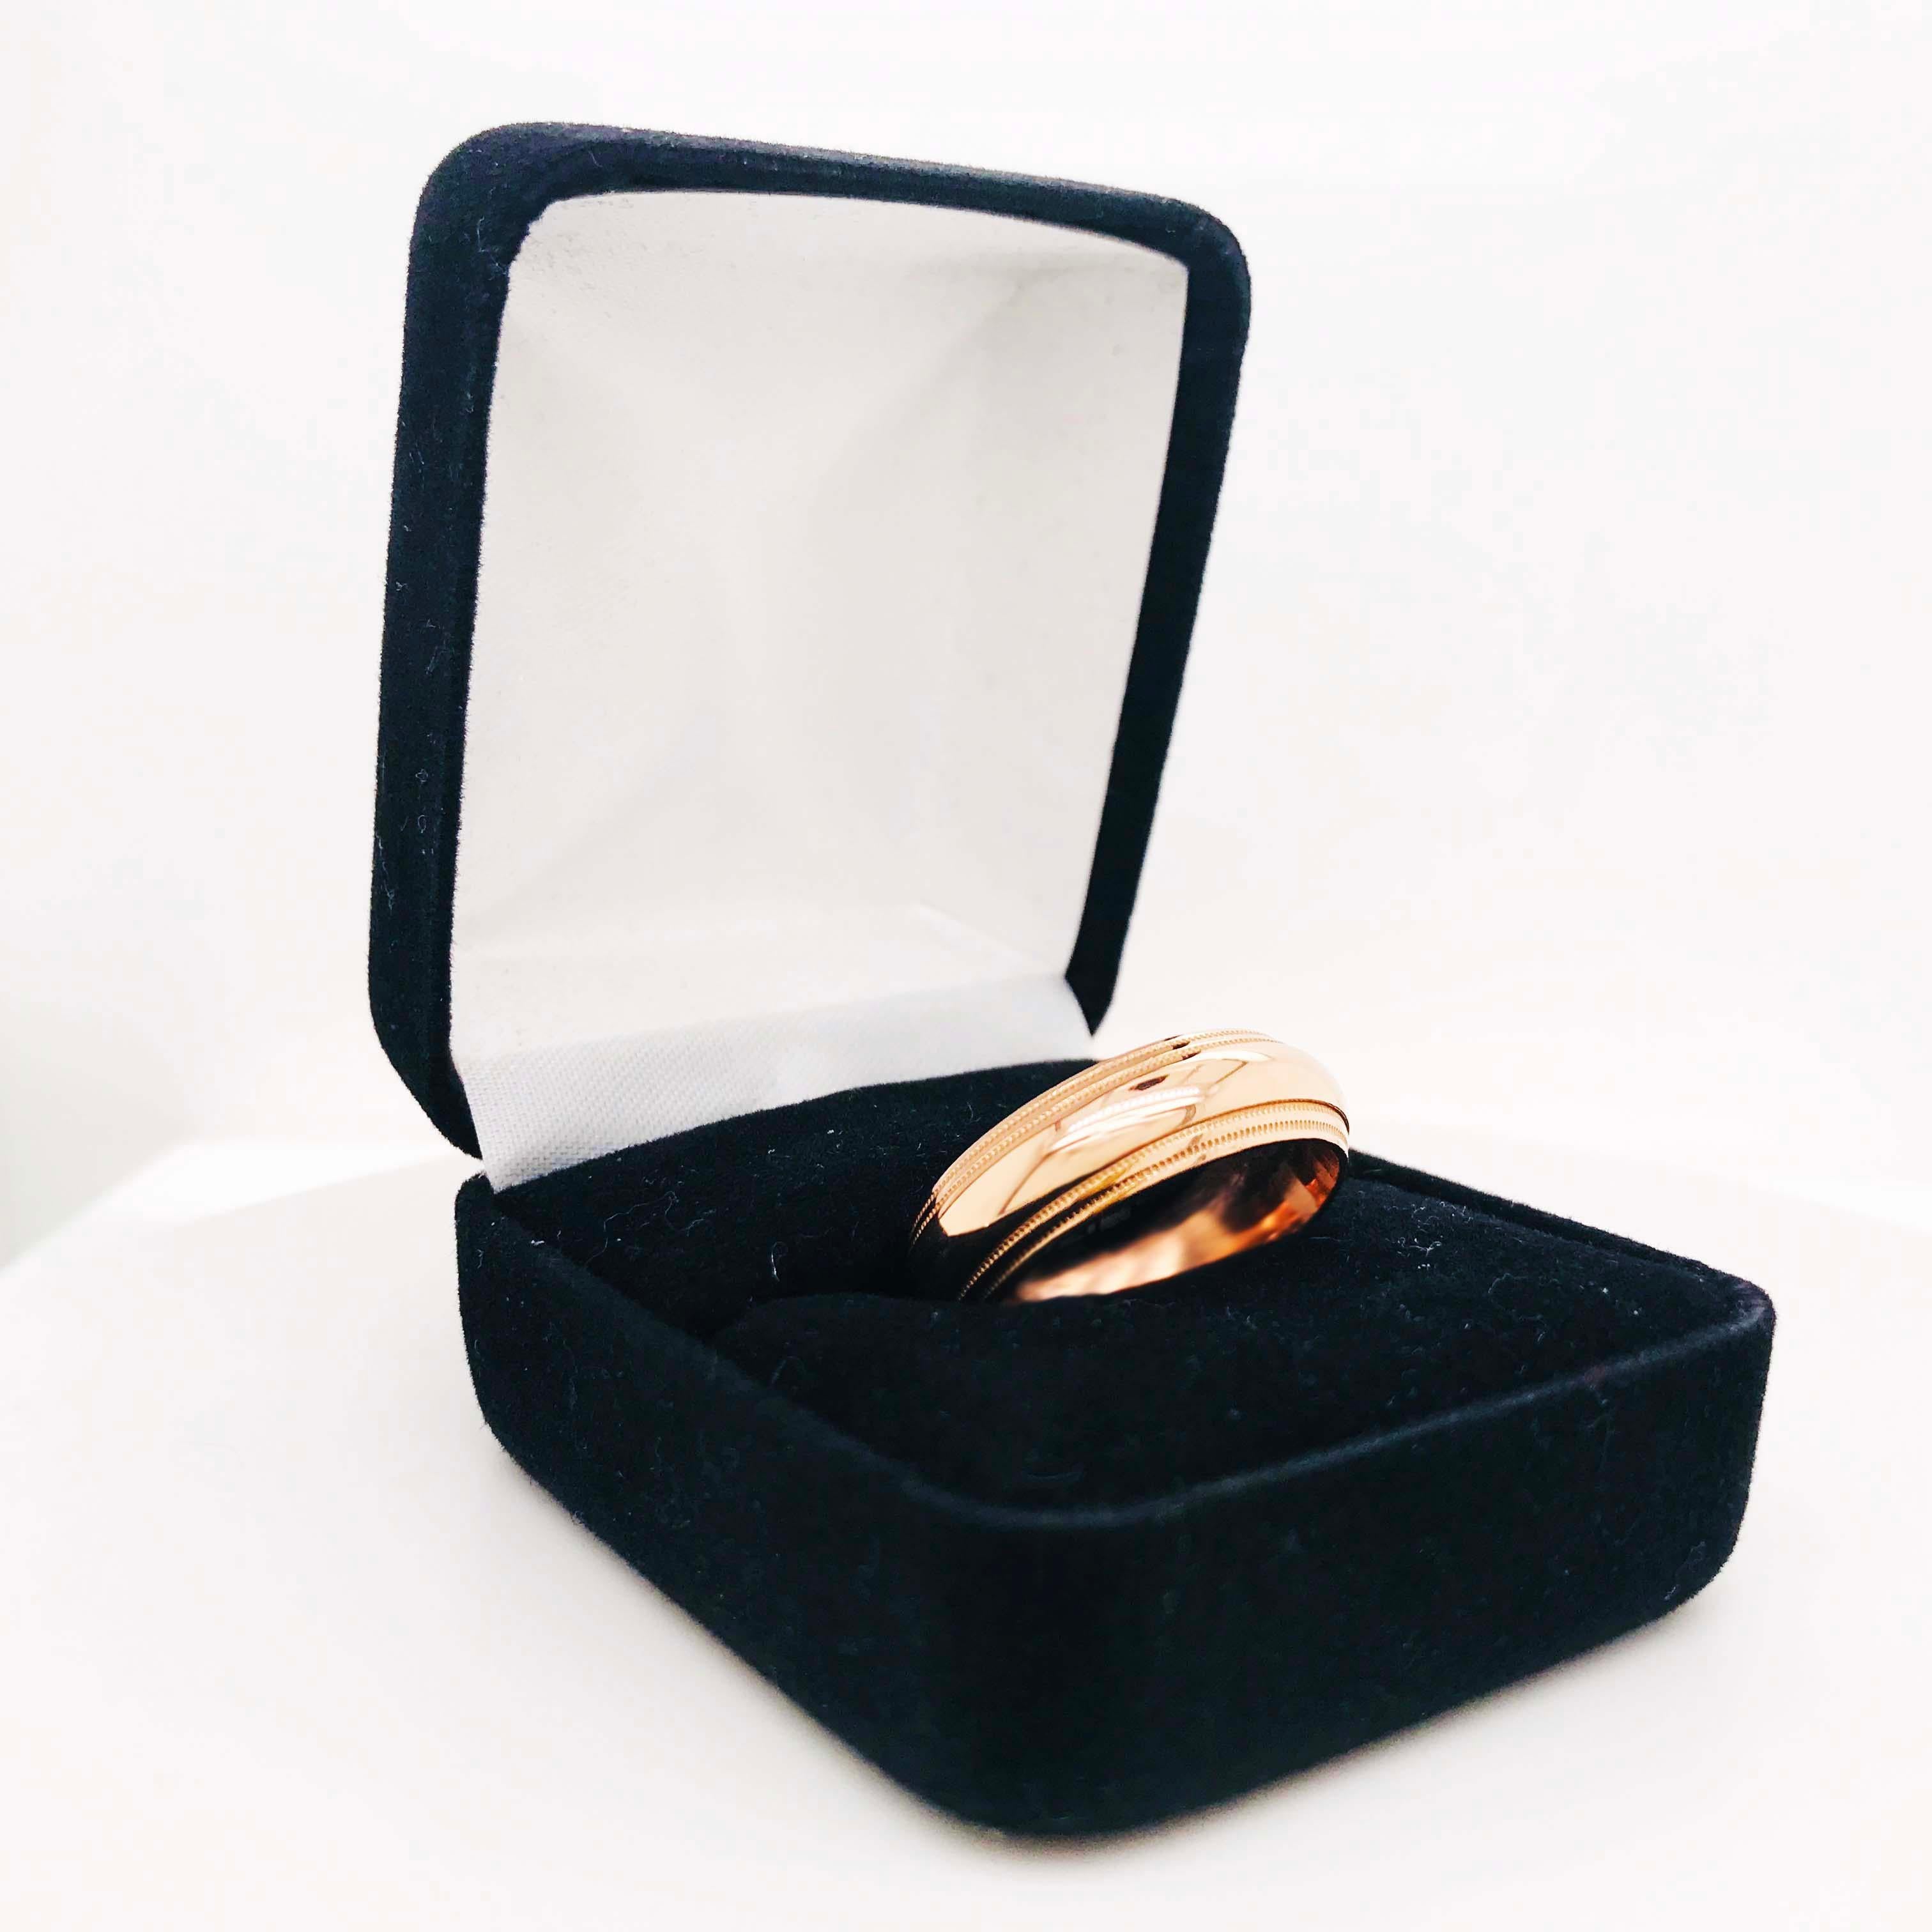 This custom rose gold band ring is a unique design with a classic structure. The band is a curved style (half round band) with a double beaded pattern near the edges of the ring. The band is 6 1/2 mm wide and made with a rich 14 karat rose gold! The